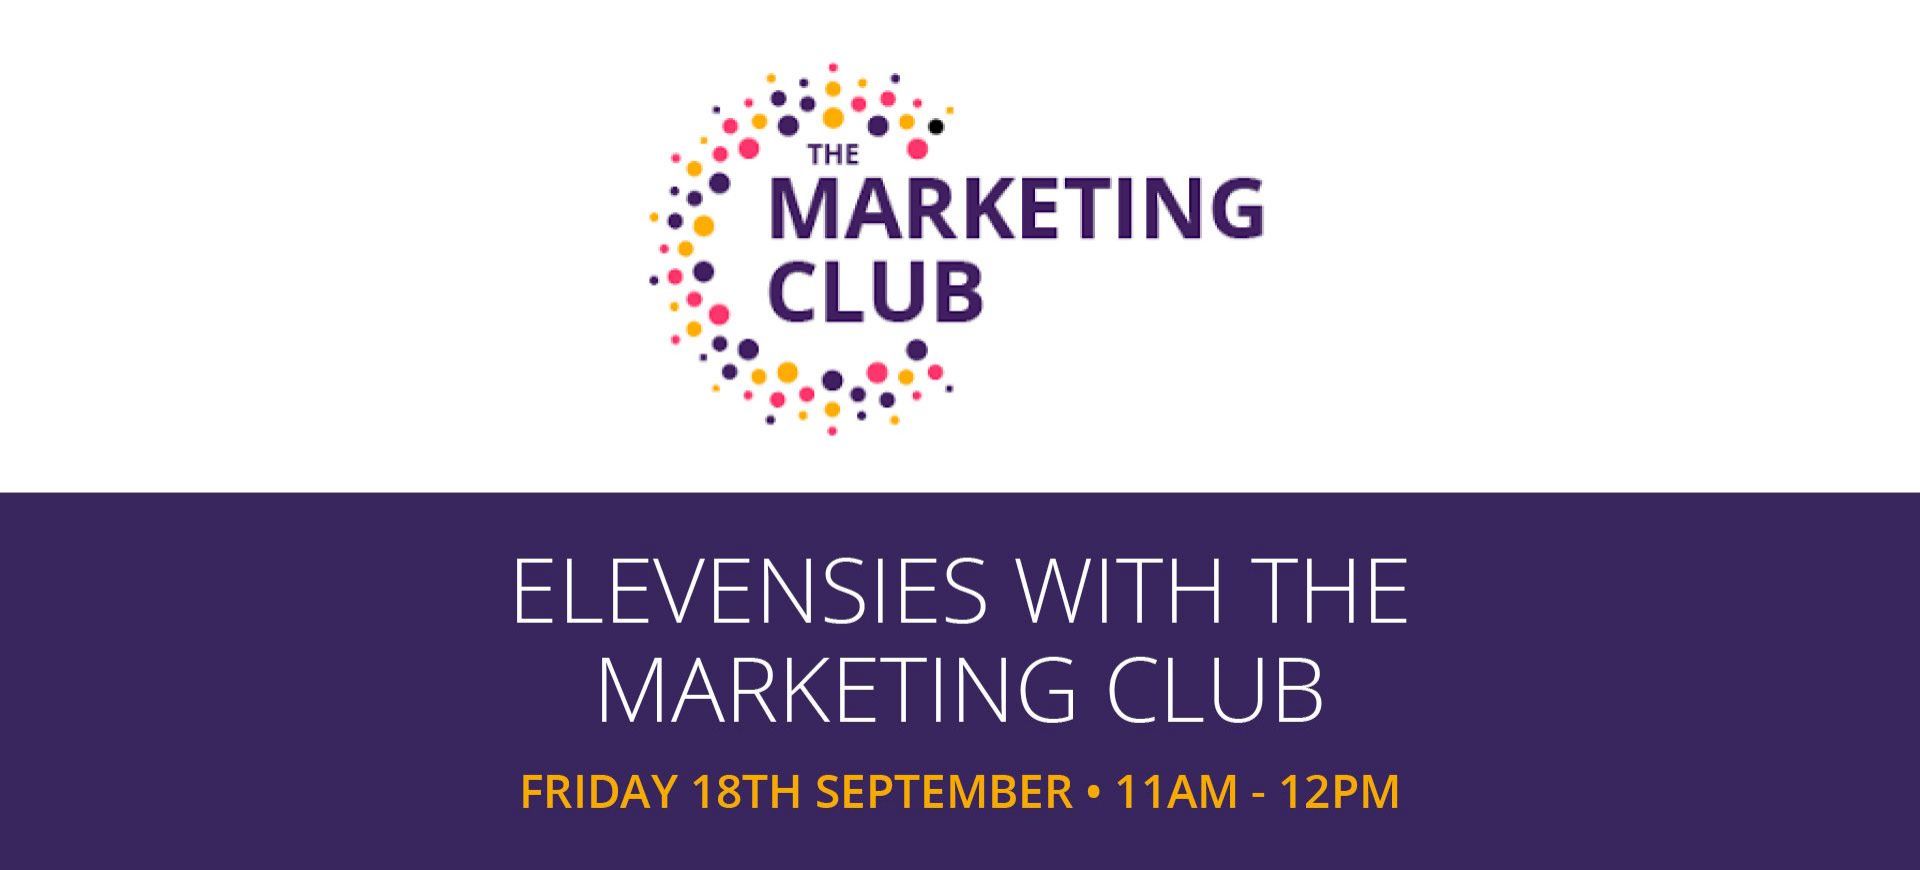 The Marketing Club: Marketing Challenges of 2020